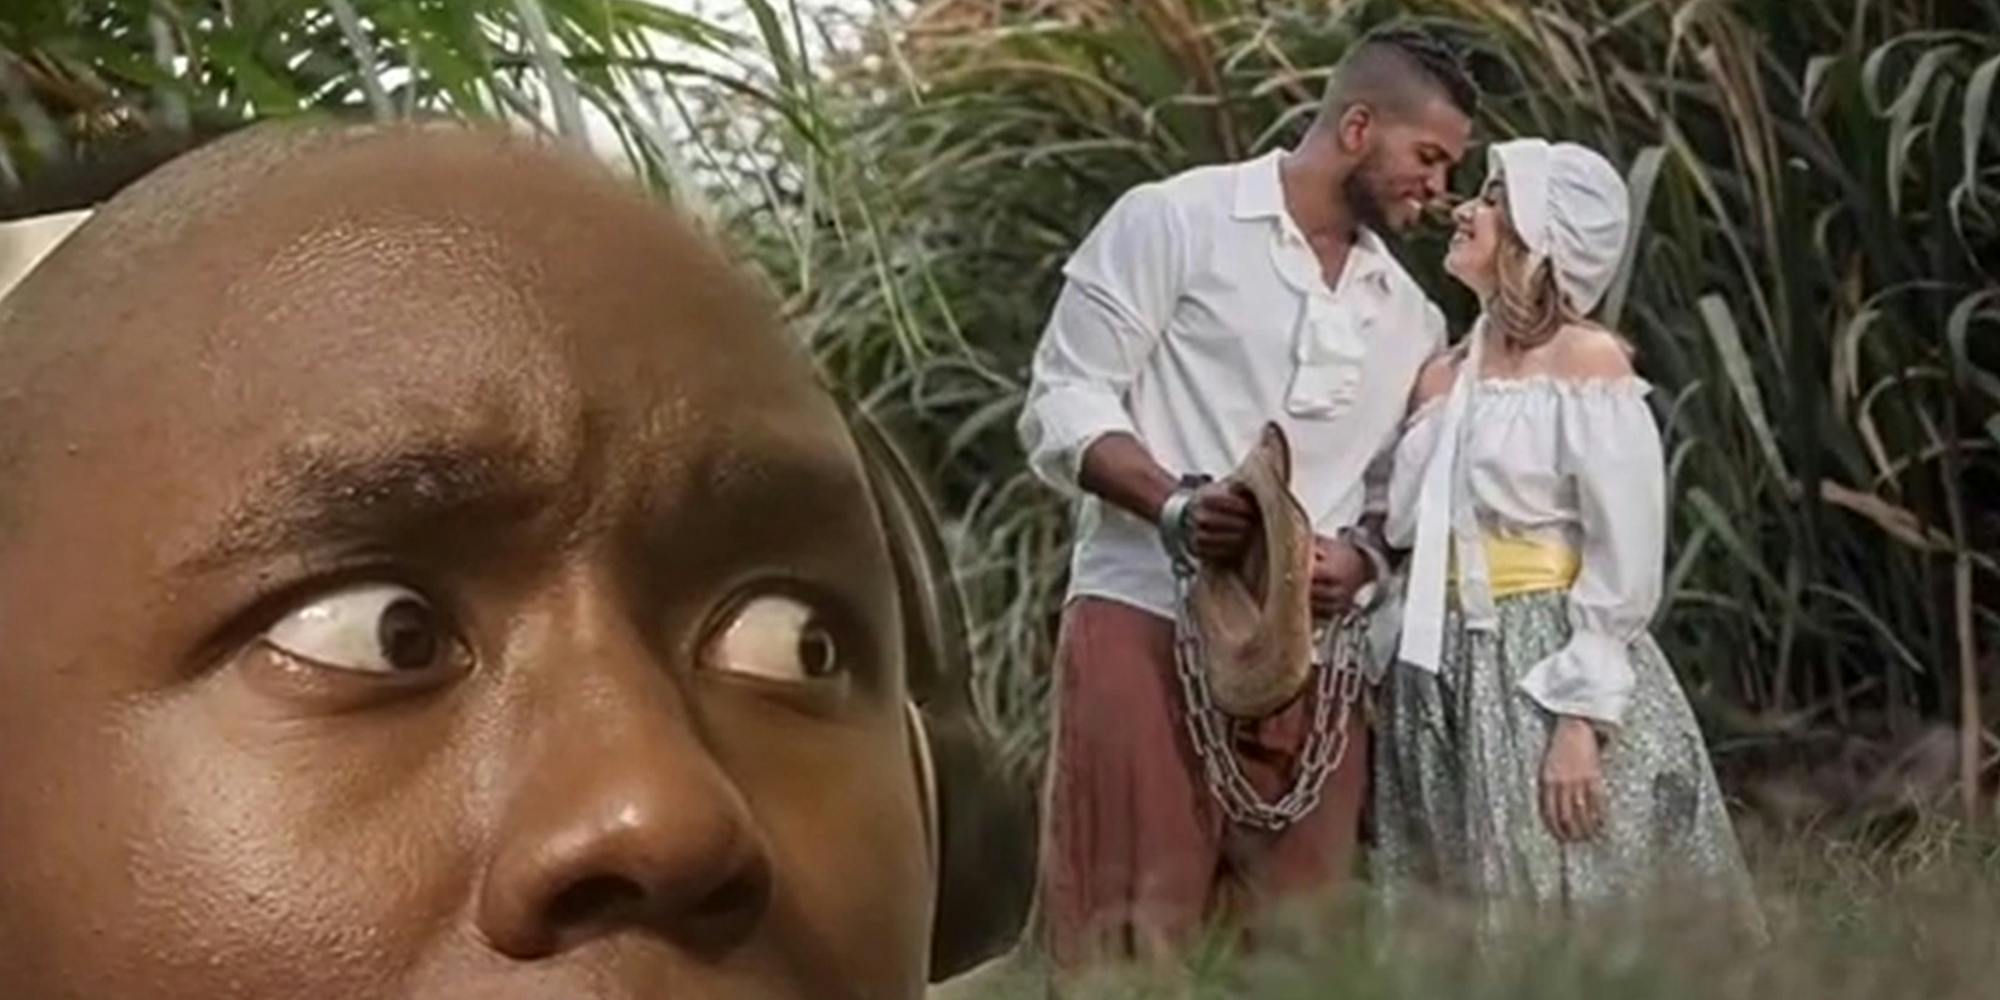 man reacting to photo of couple dressed as slave and plantation owner